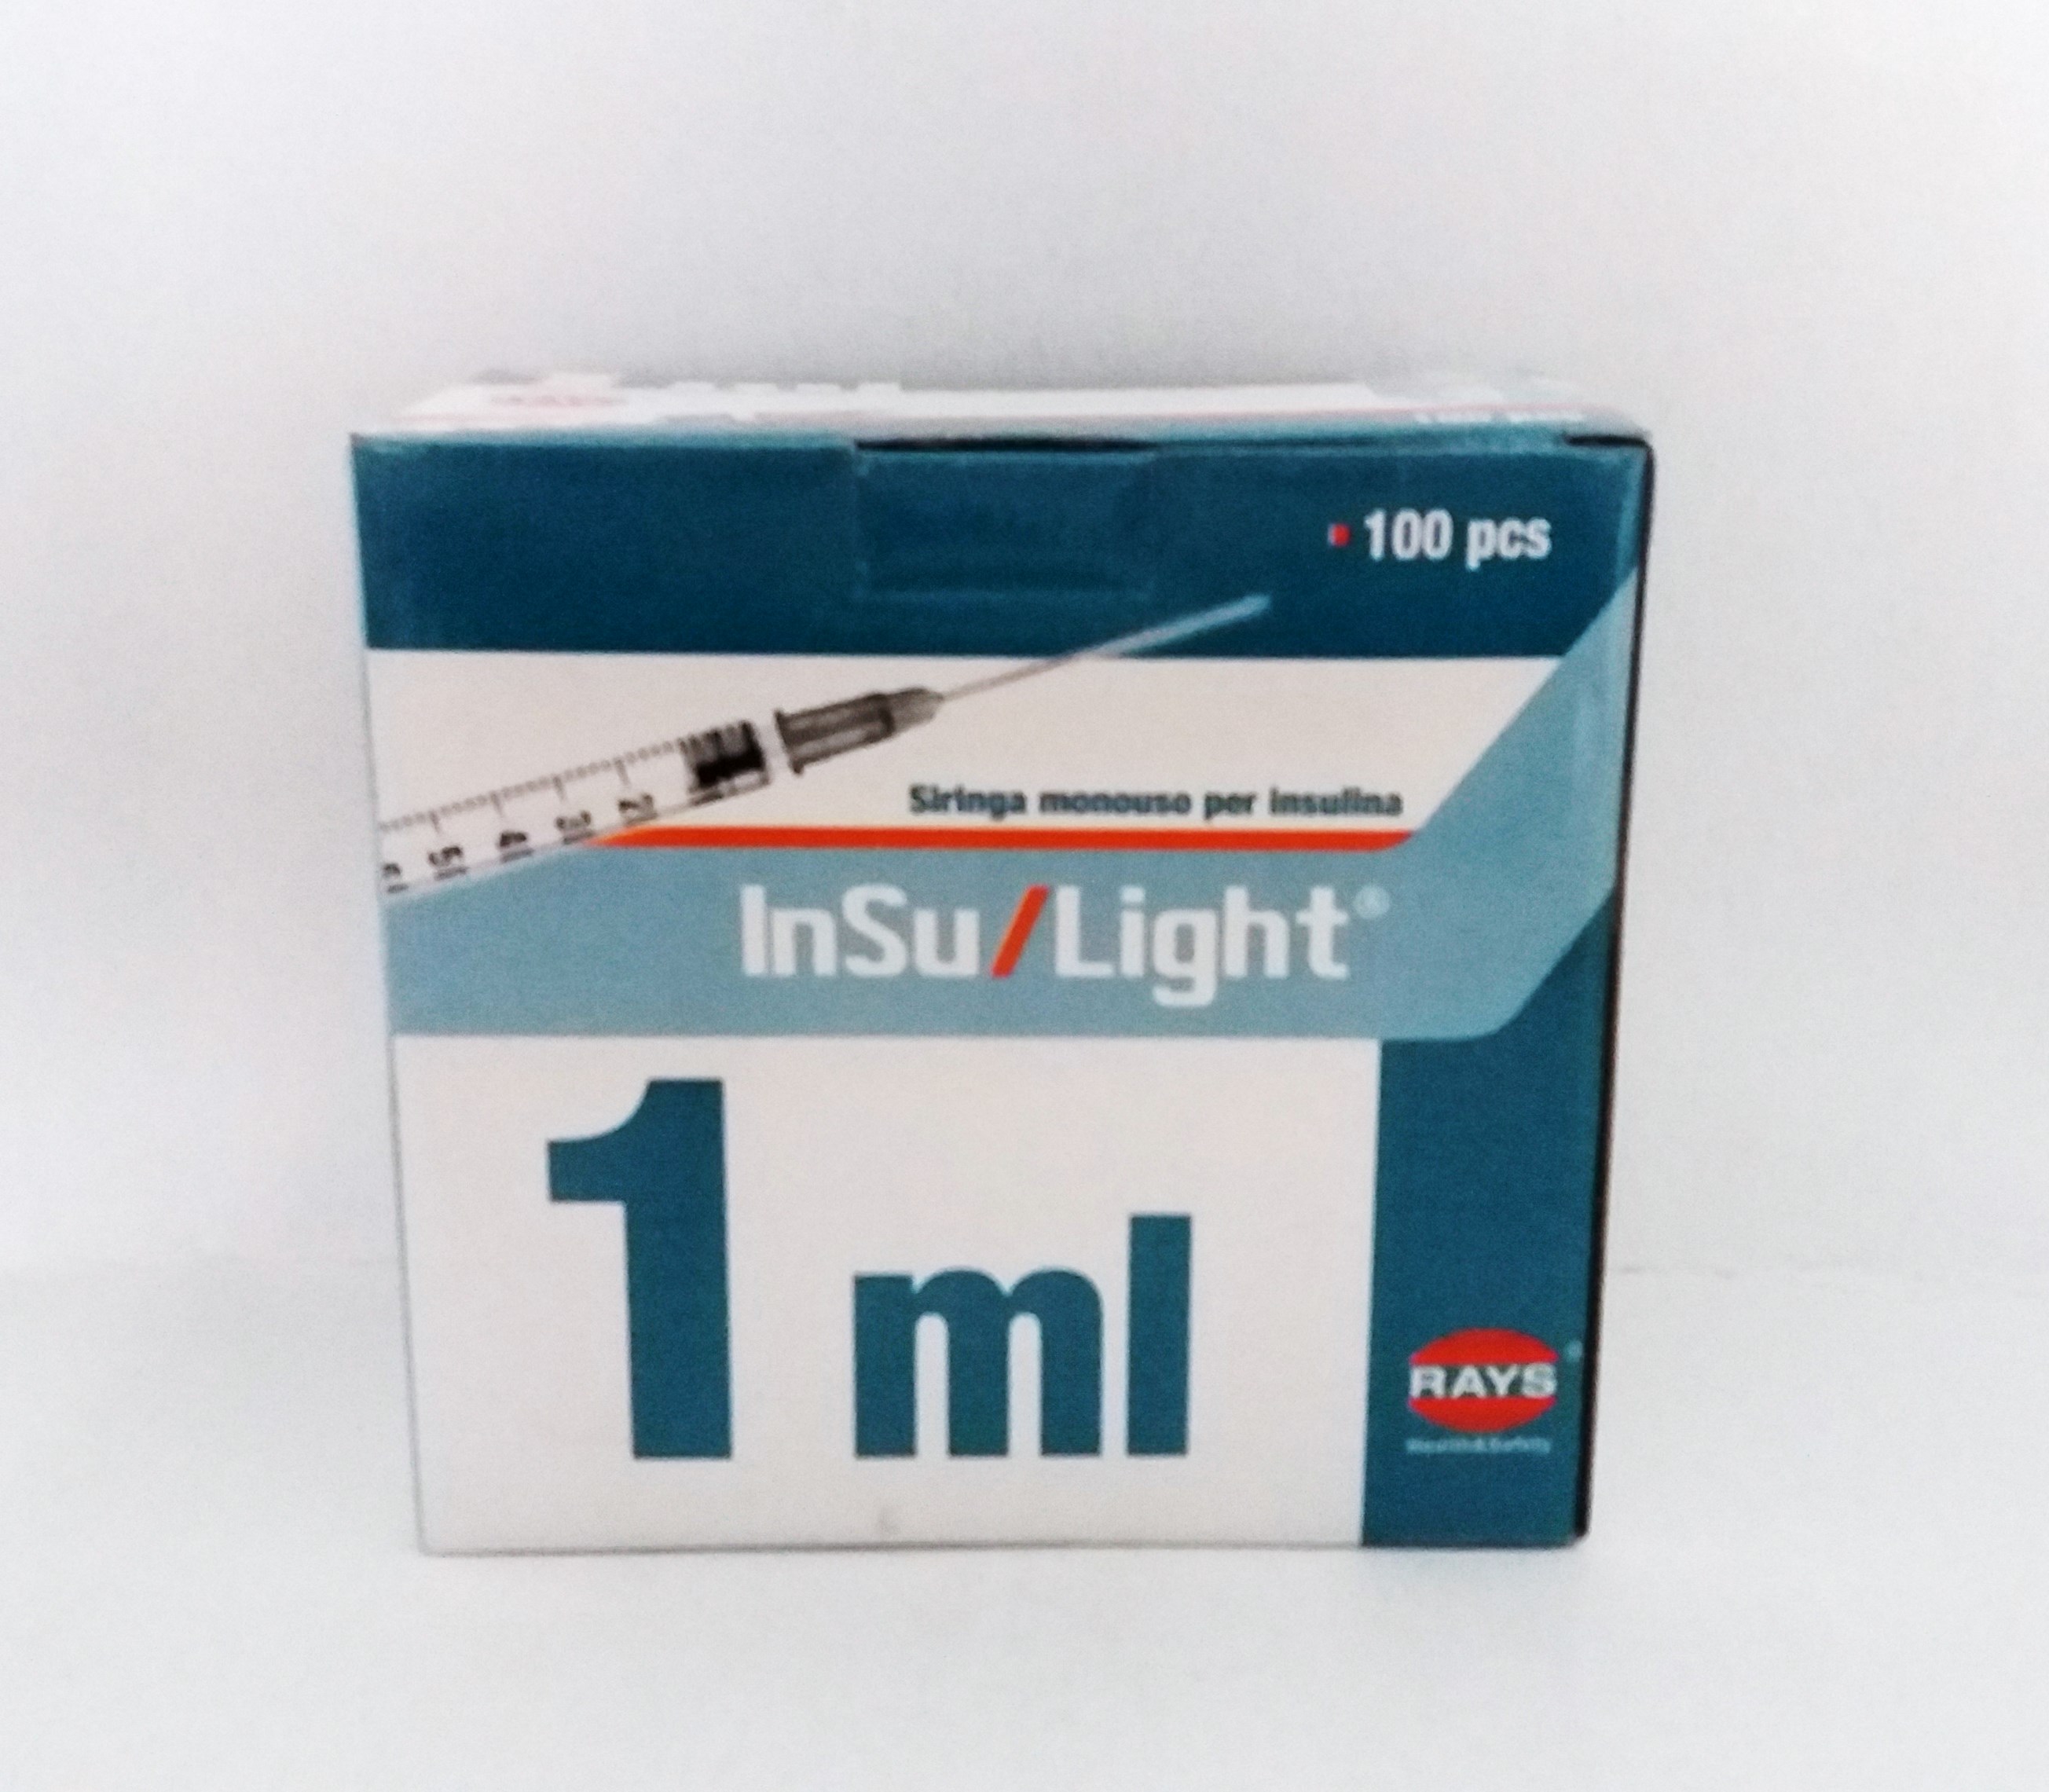 Dispoasable syringes for insulin 1 ml Rays, needle 27G x 1/2"